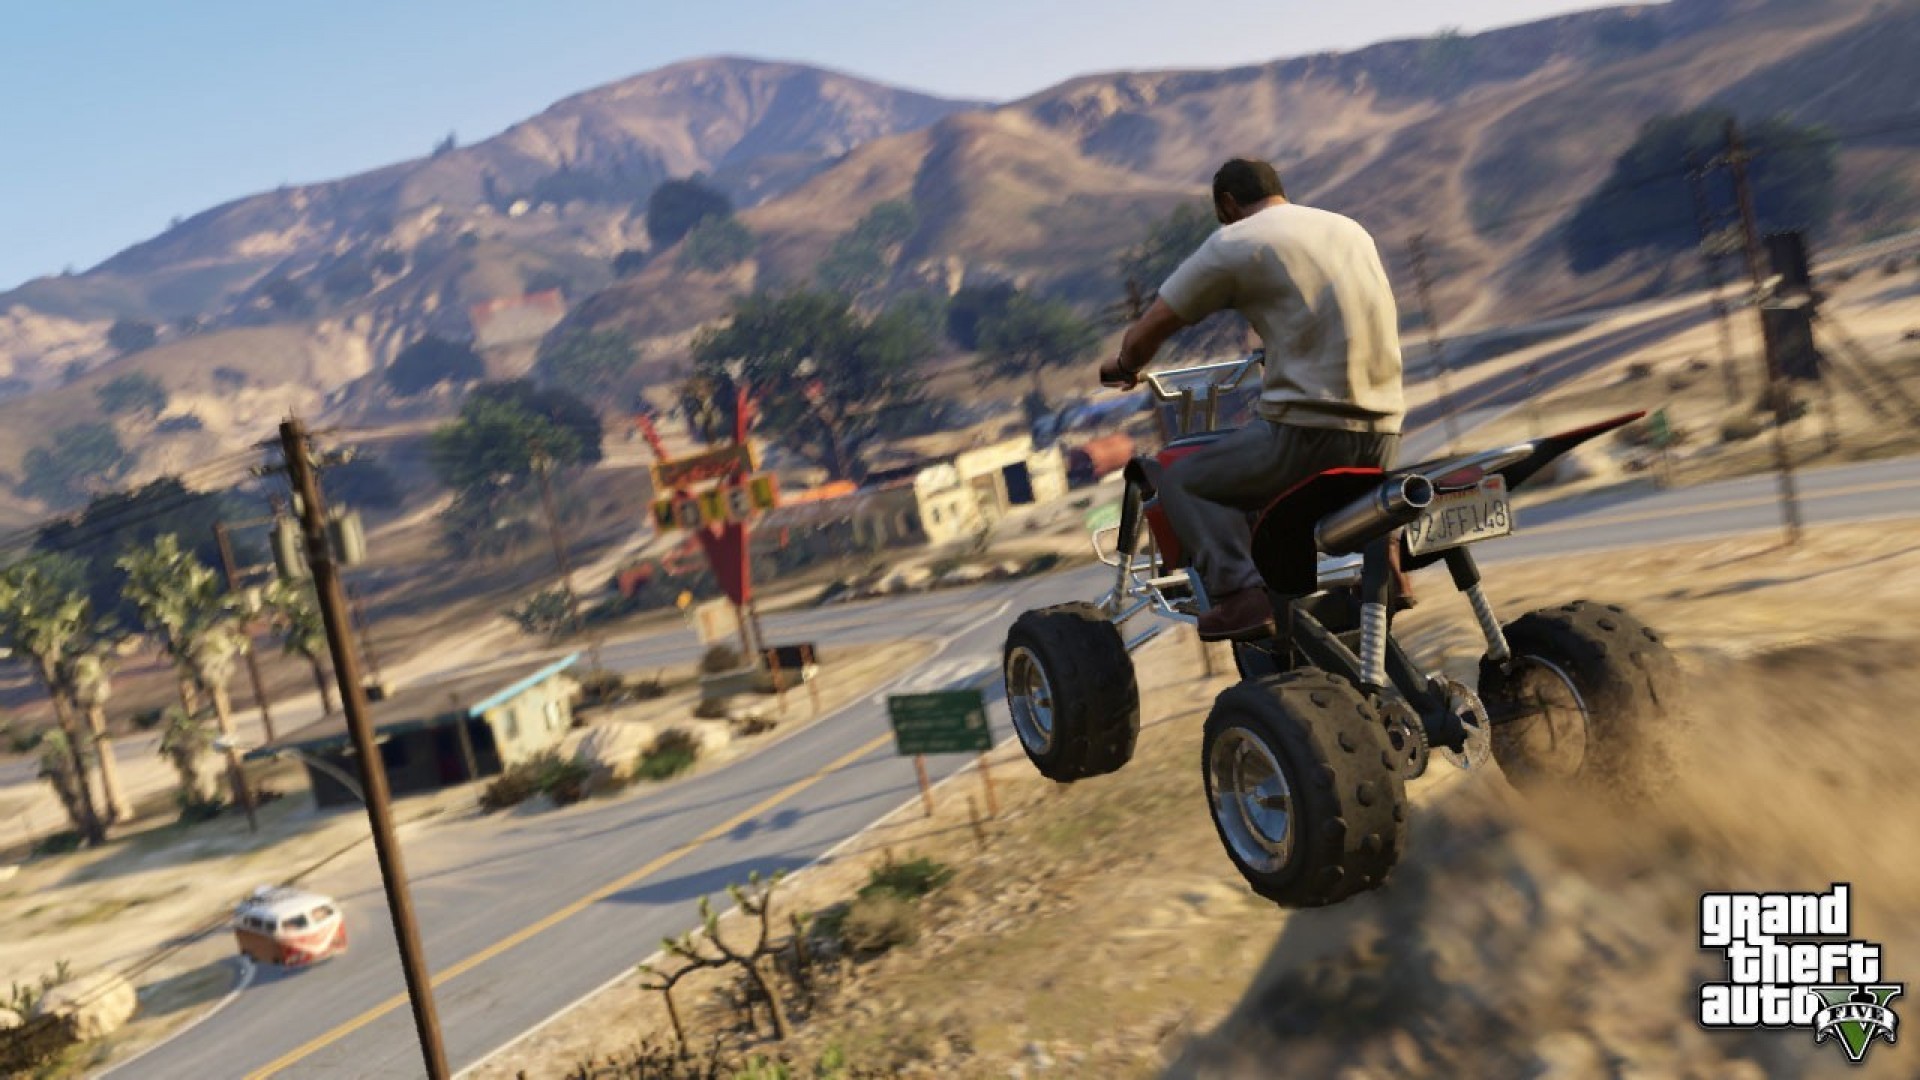 Gta V Hd Backgrounds Grand Theft Auto V Hd Backgrounds - Gta V In Game - HD Wallpaper 